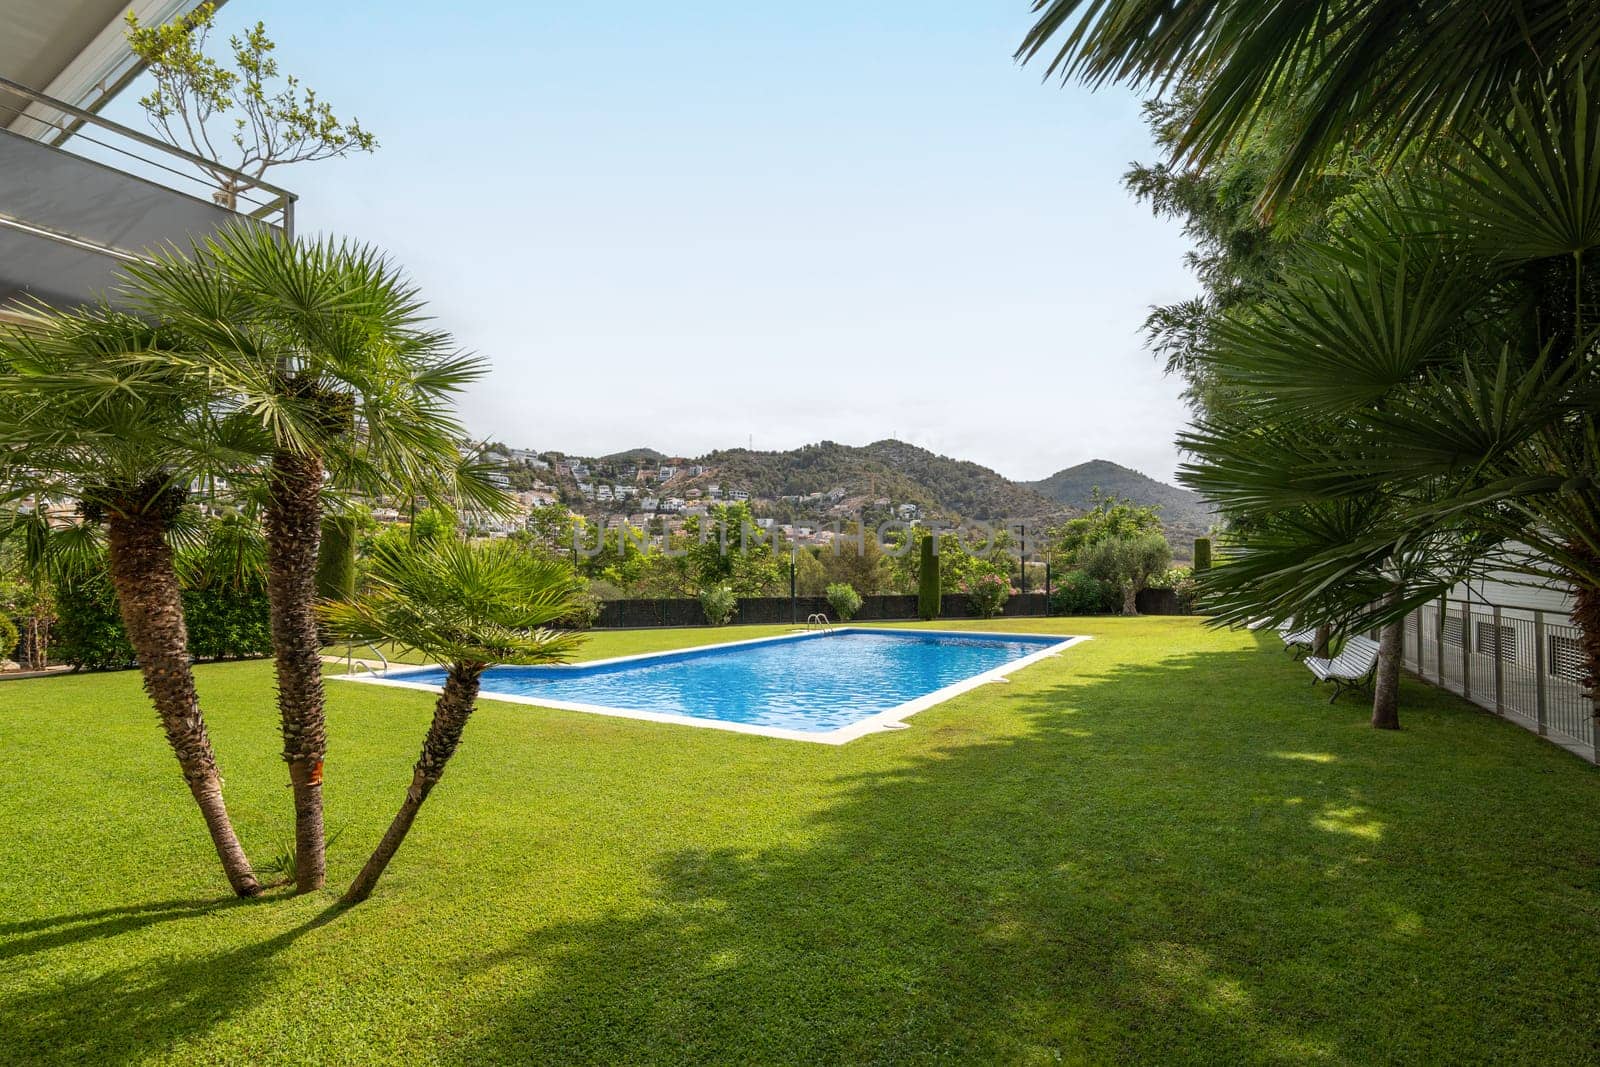 Scenic view of a serene garden with a pool, surrounded by lush greenery and hills.